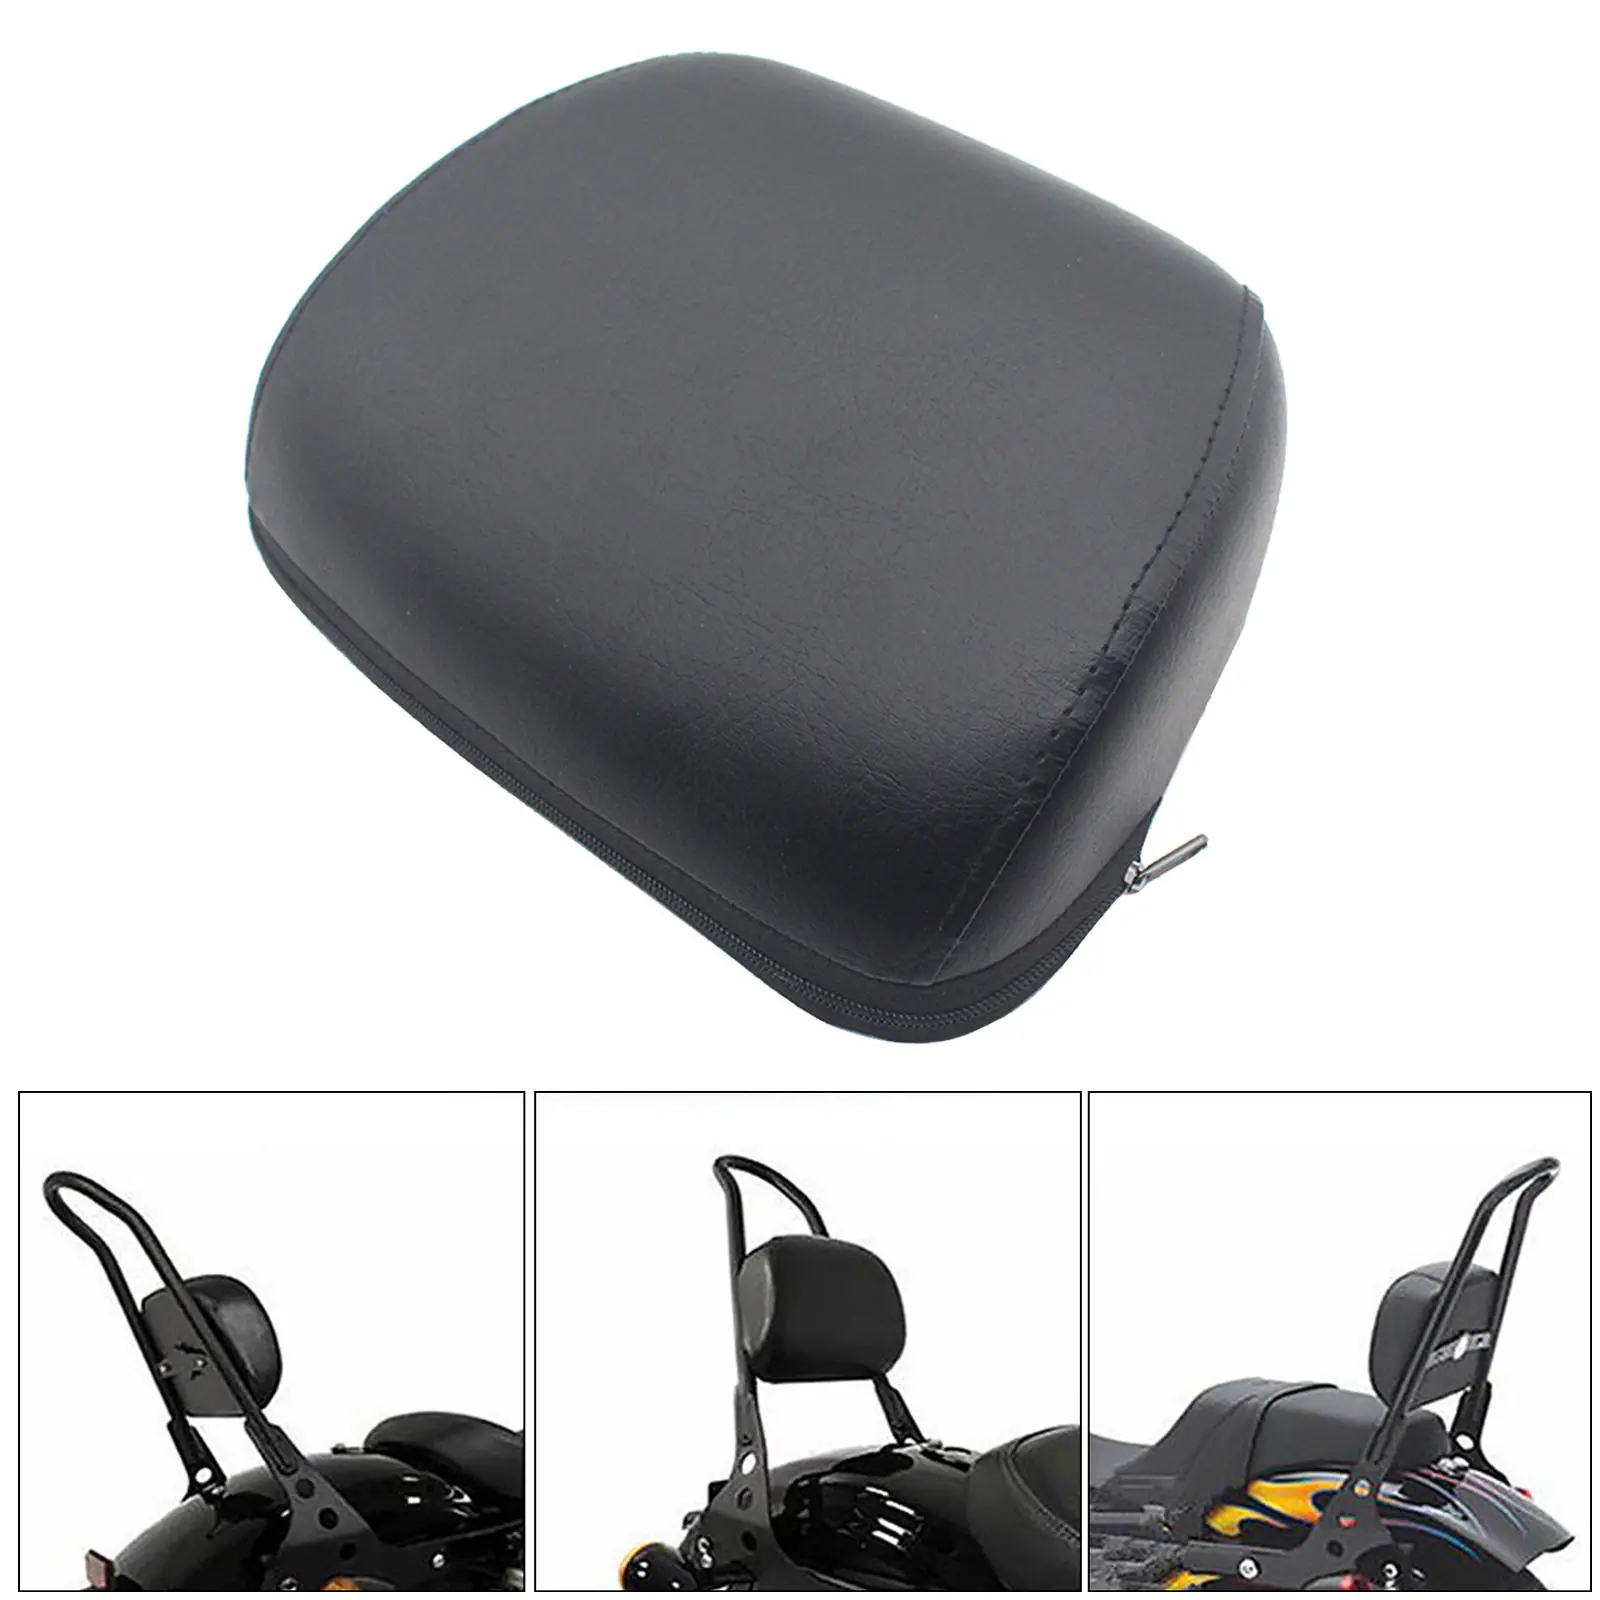 Backrest Pad Pads Back Rest Passenger Sissy Bar Detachable Fit for Harley 883 1200 48 Replacement Part Comfortable